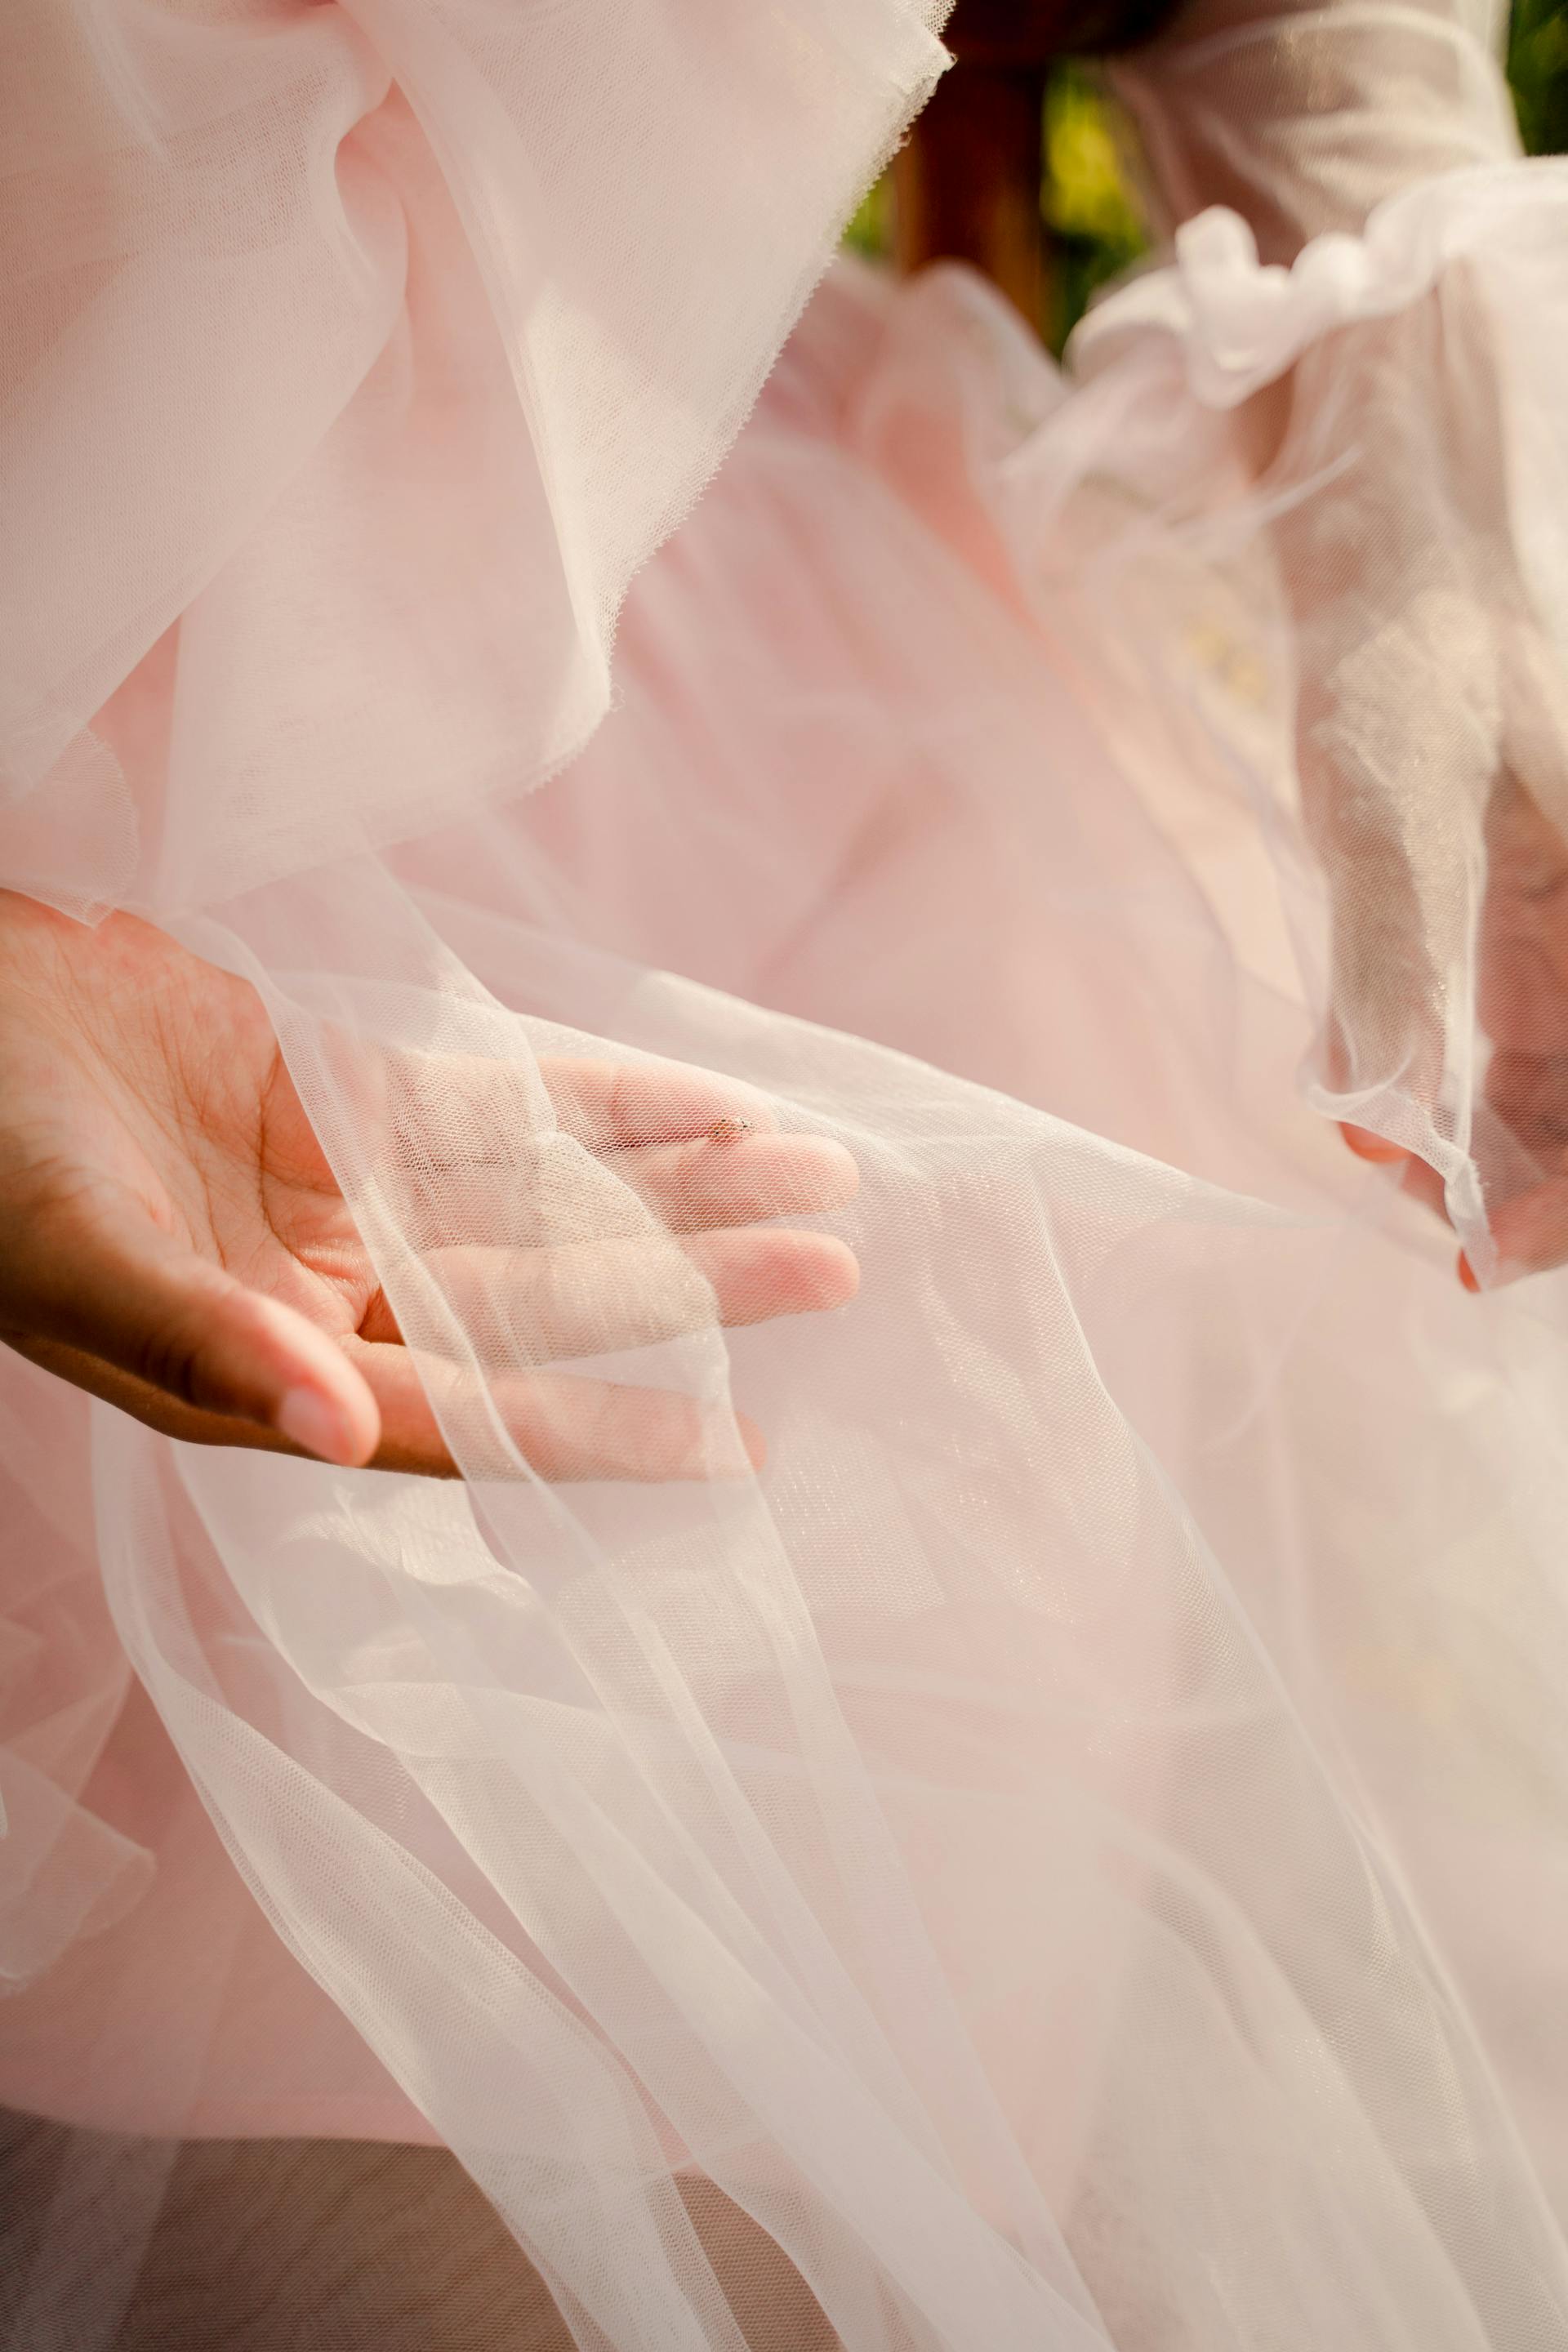 A person holding pink tulle | Source: Pexels